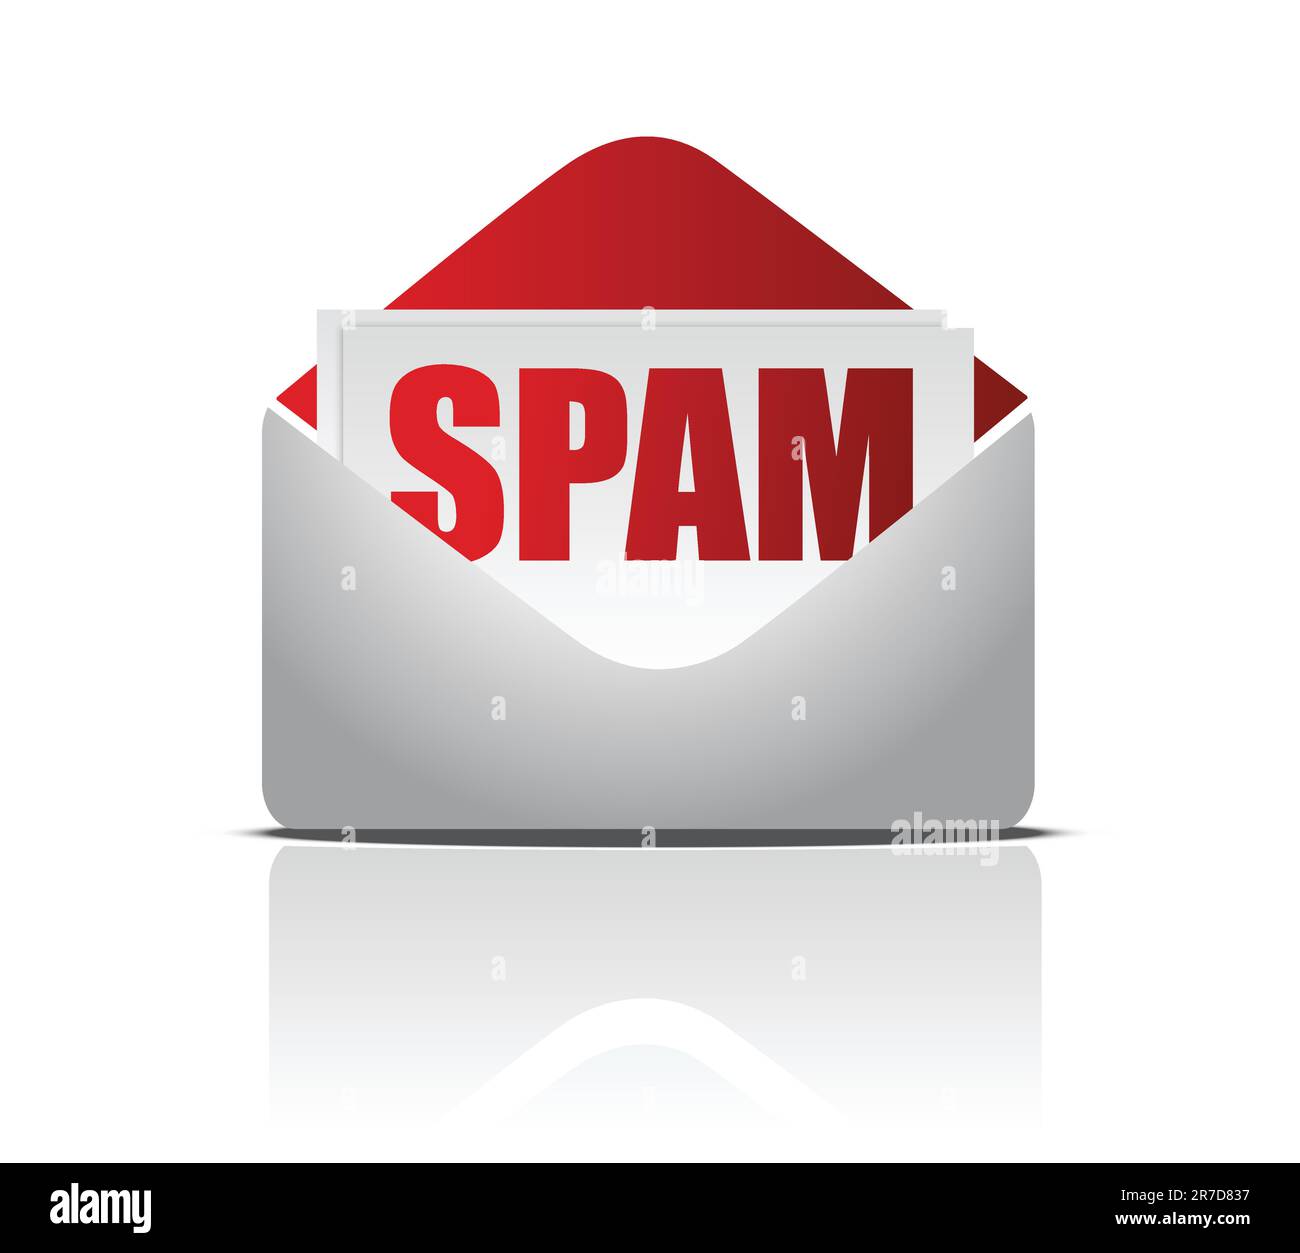 Spam mail illustration design isolated over a white background Stock Vector